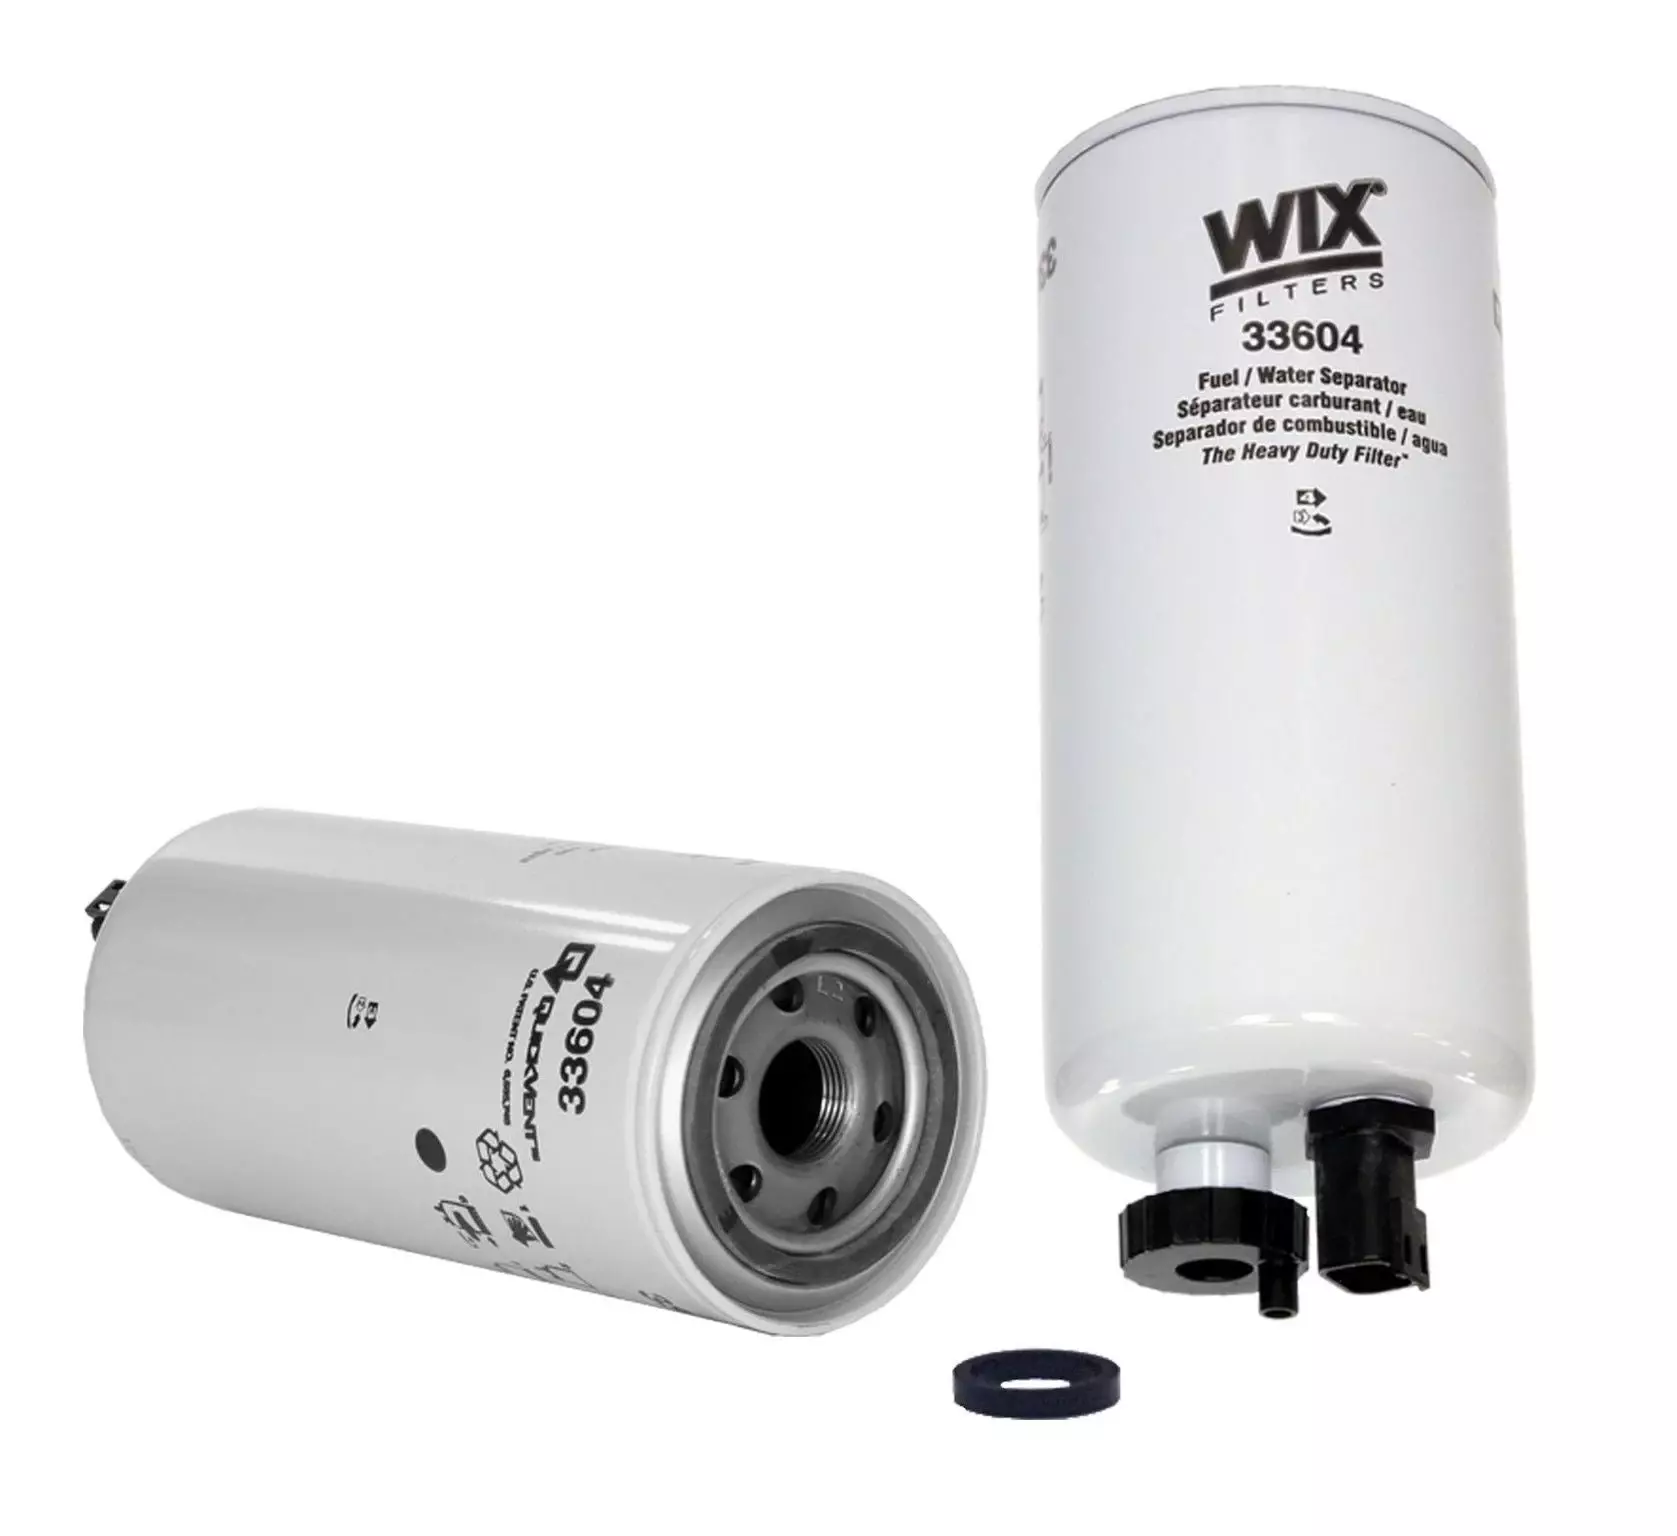 Wix Filters 33604 Fuel Filter, Water Separator, 8 Micron, Canister, 9.730 in Tall, 1-14 in Thread, Steel, White, 8.9 L, Cummins Inline-6, Each